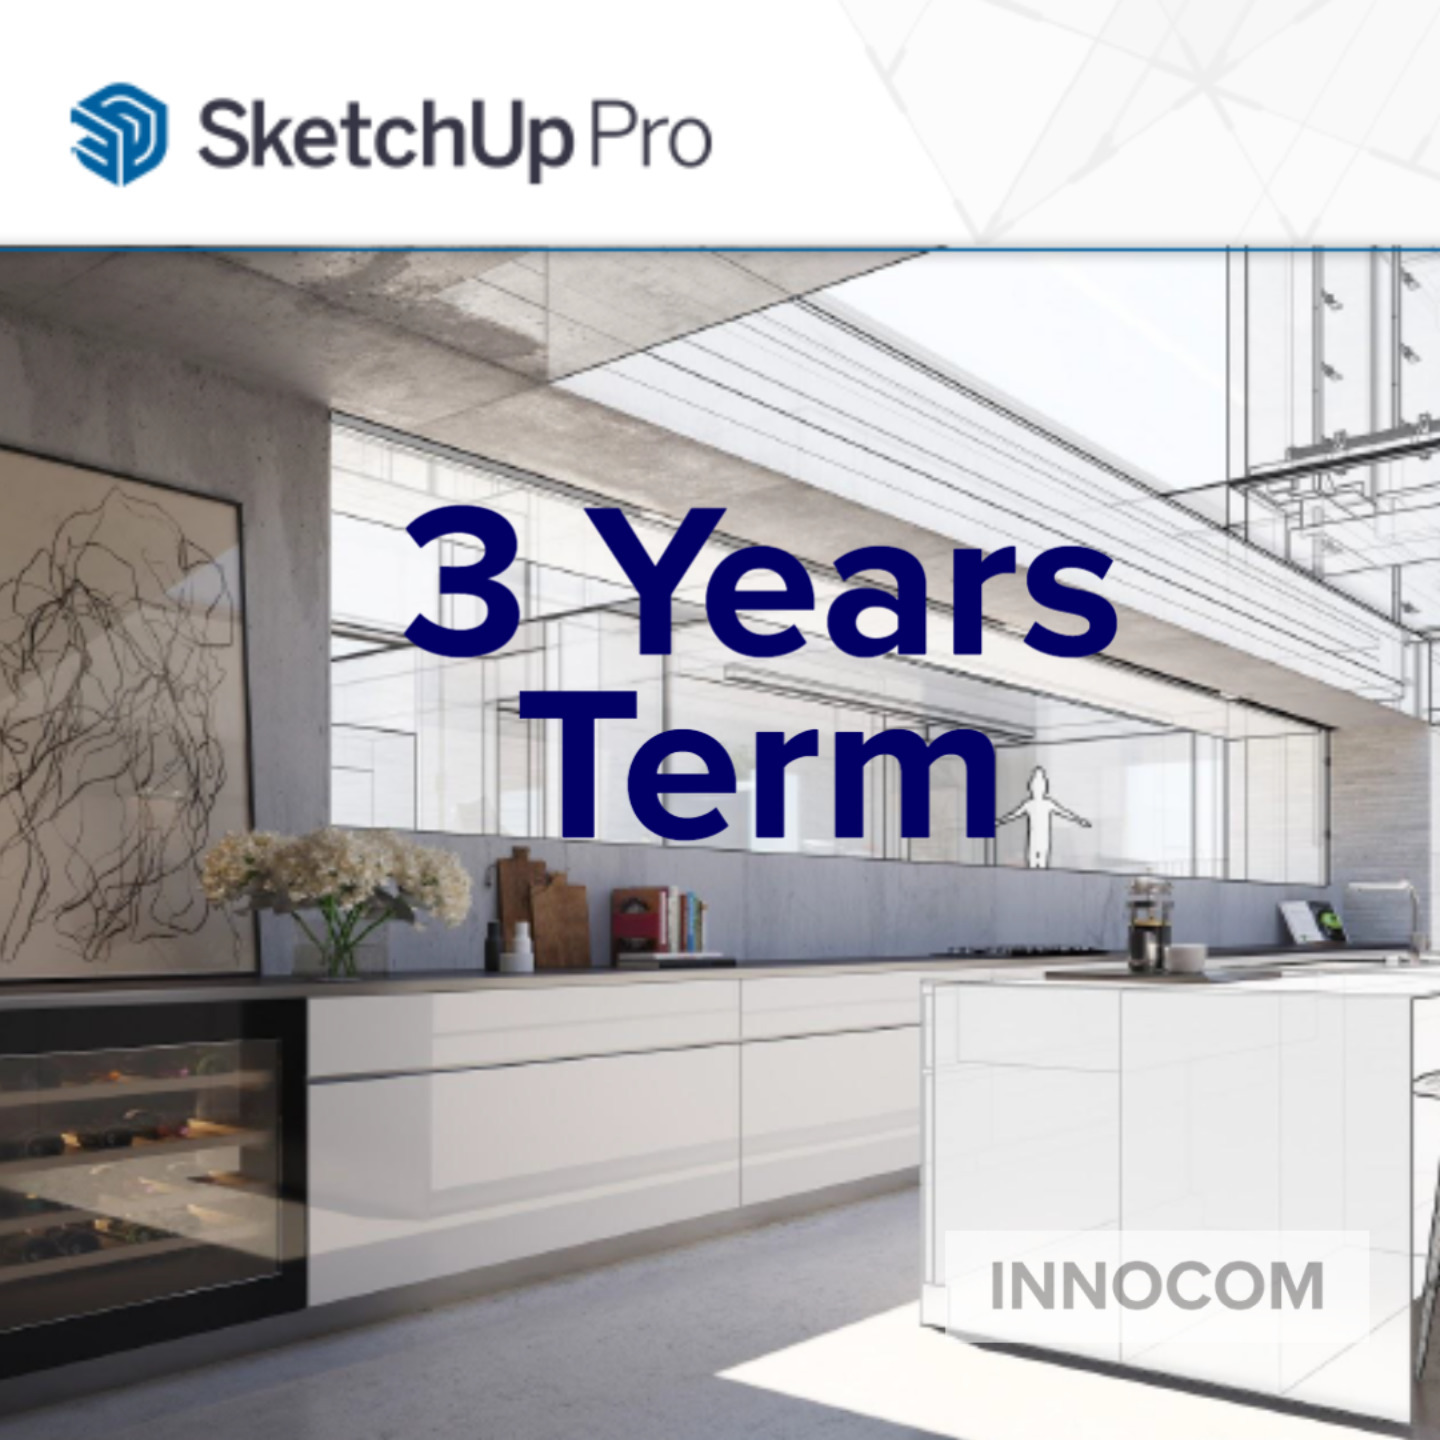 SketchUp Pro 2021-Annual 3 Years Term